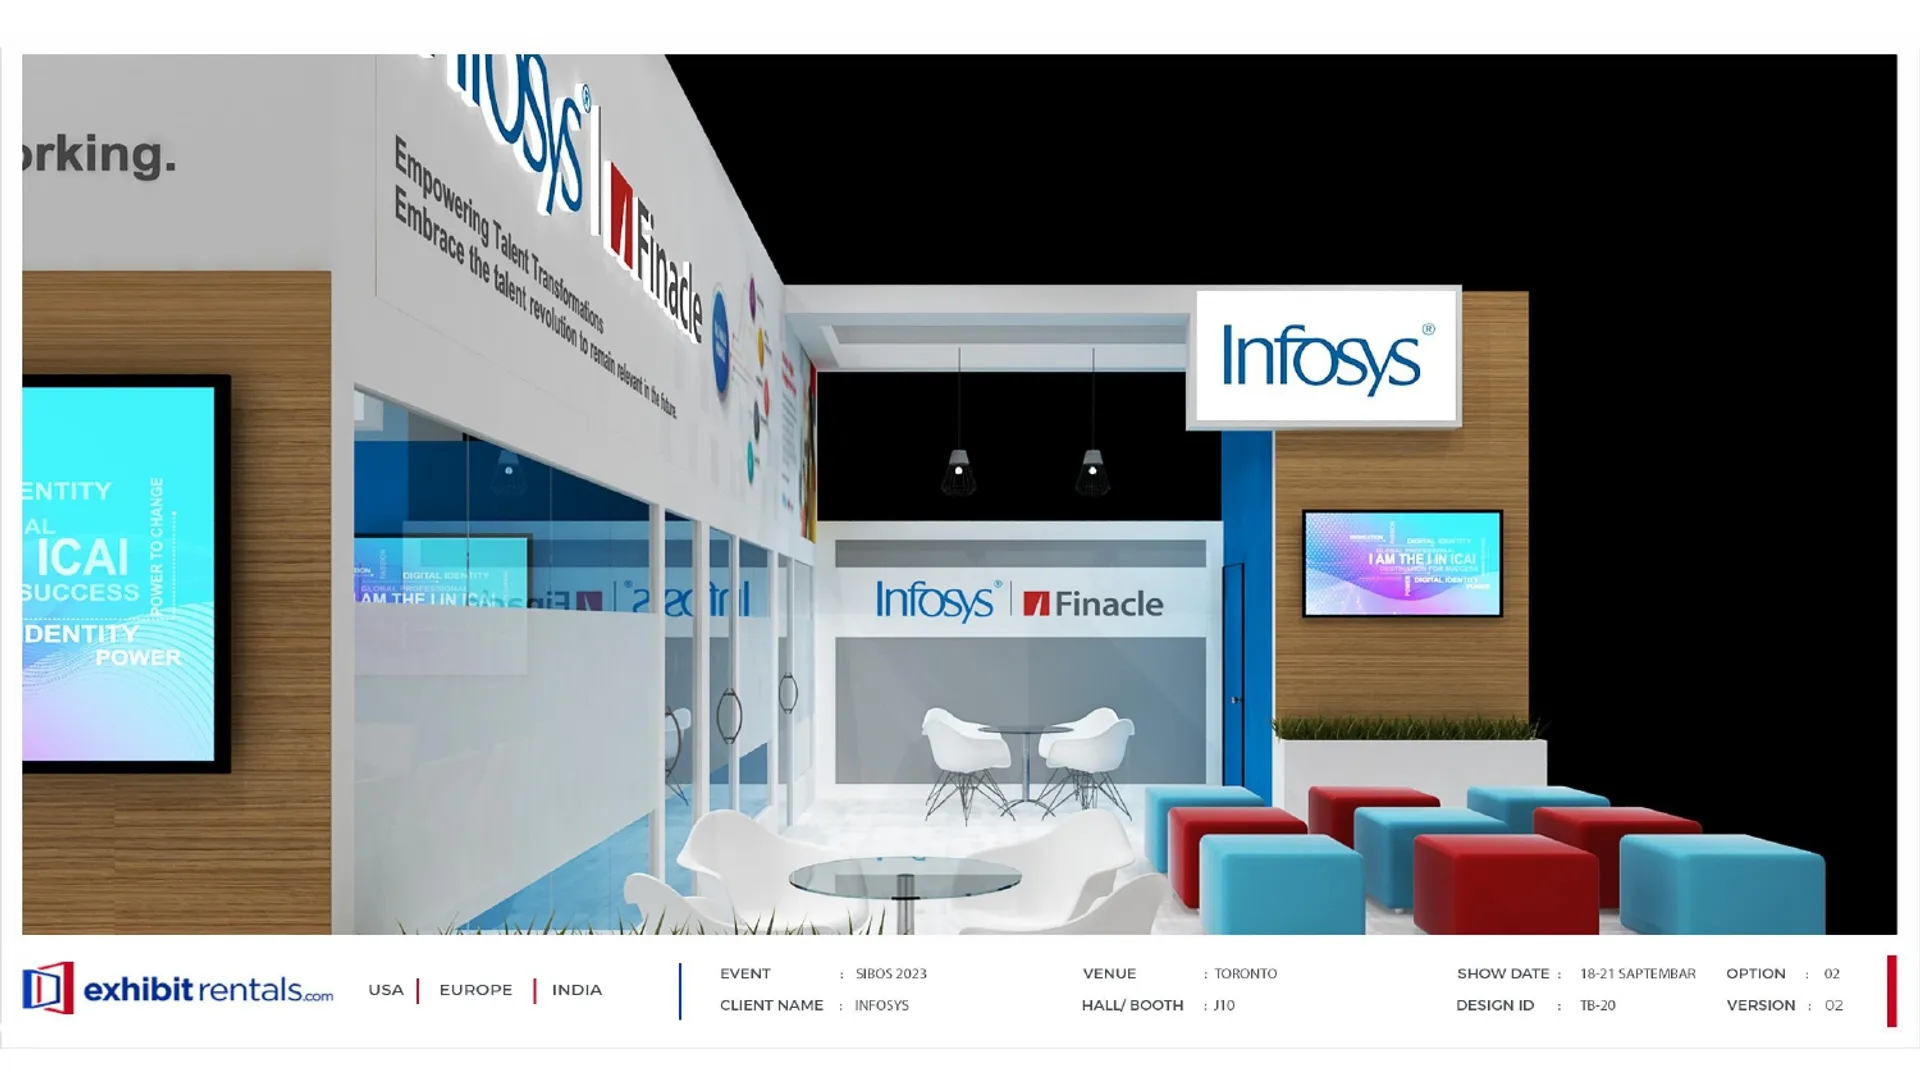 booth-design-projects/Exhibit-Rentals/2024-04-17-30x40-PENINSULA-Project-98/2.2 - Infosys - ER Design Presentation.pptx-19_page-0001-2iyyce.jpg